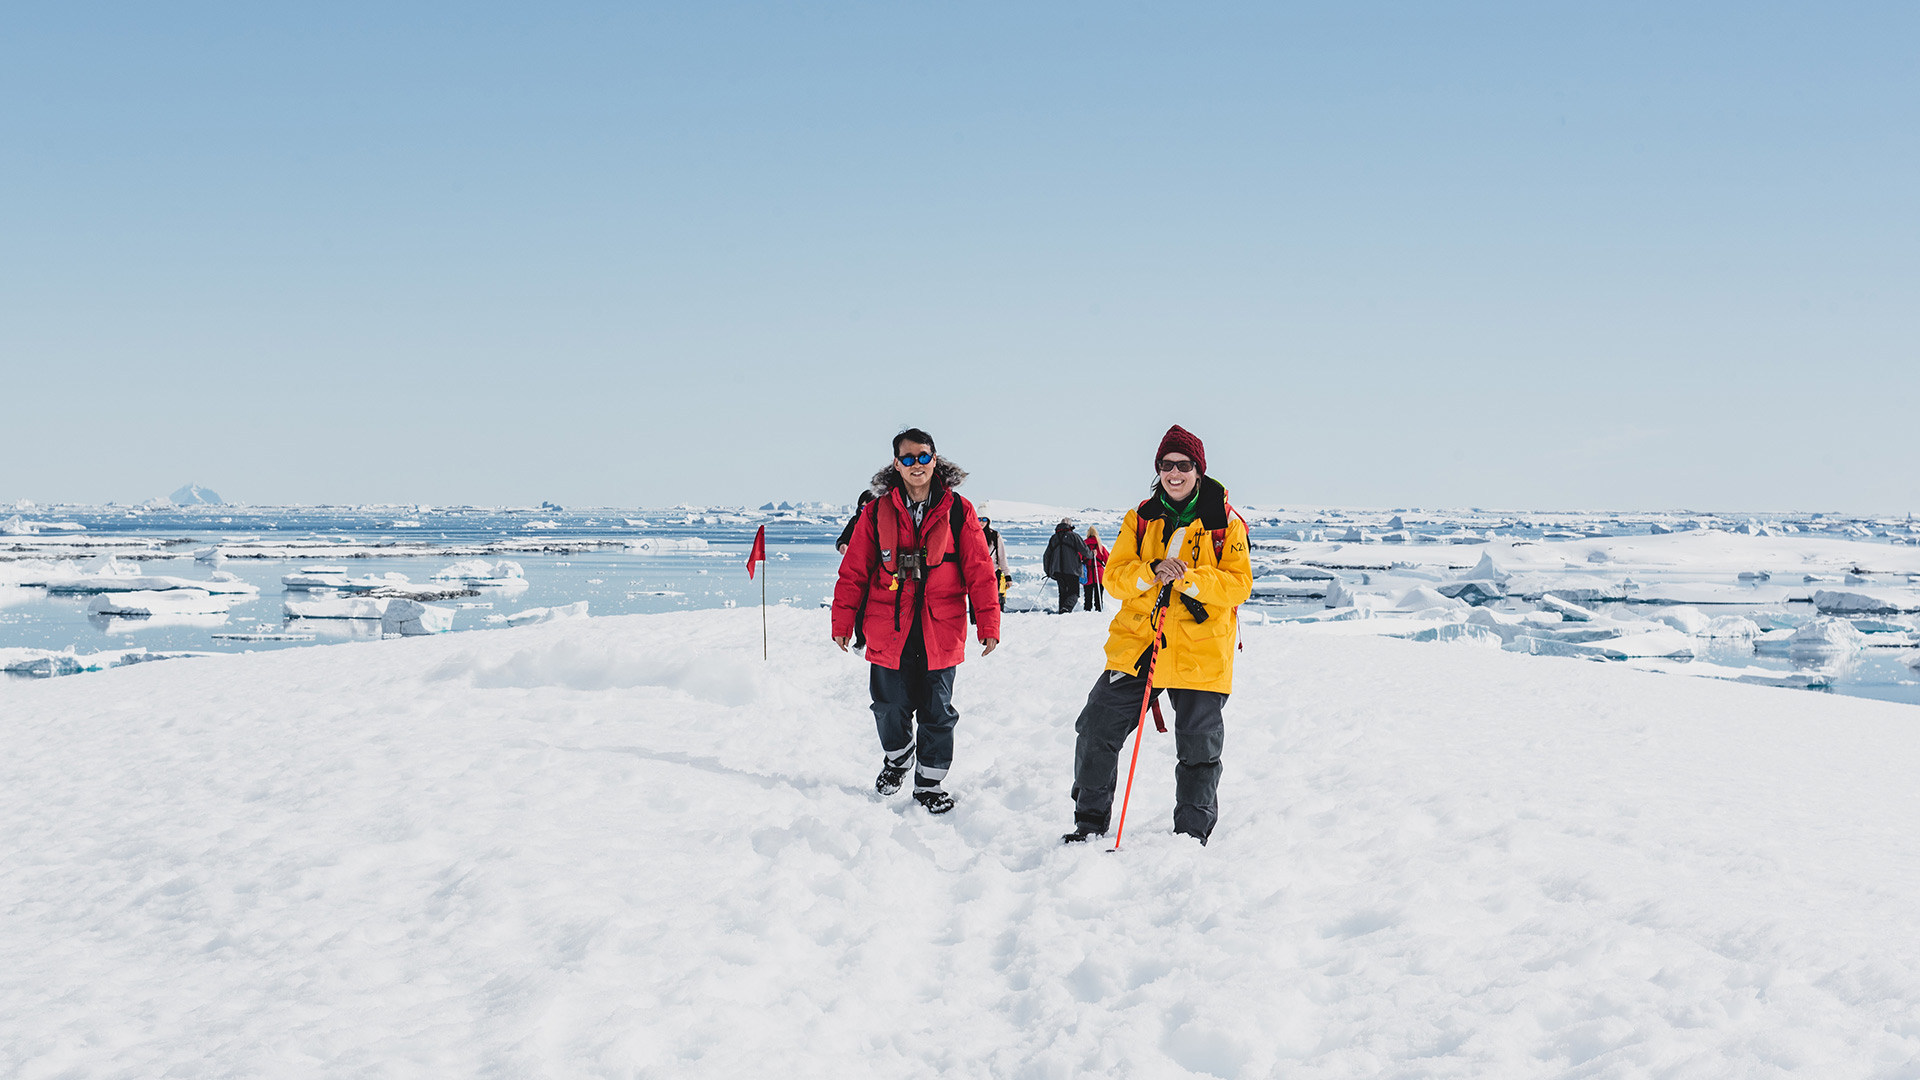 Walk on sea ice in Antarctica, excursion on land.